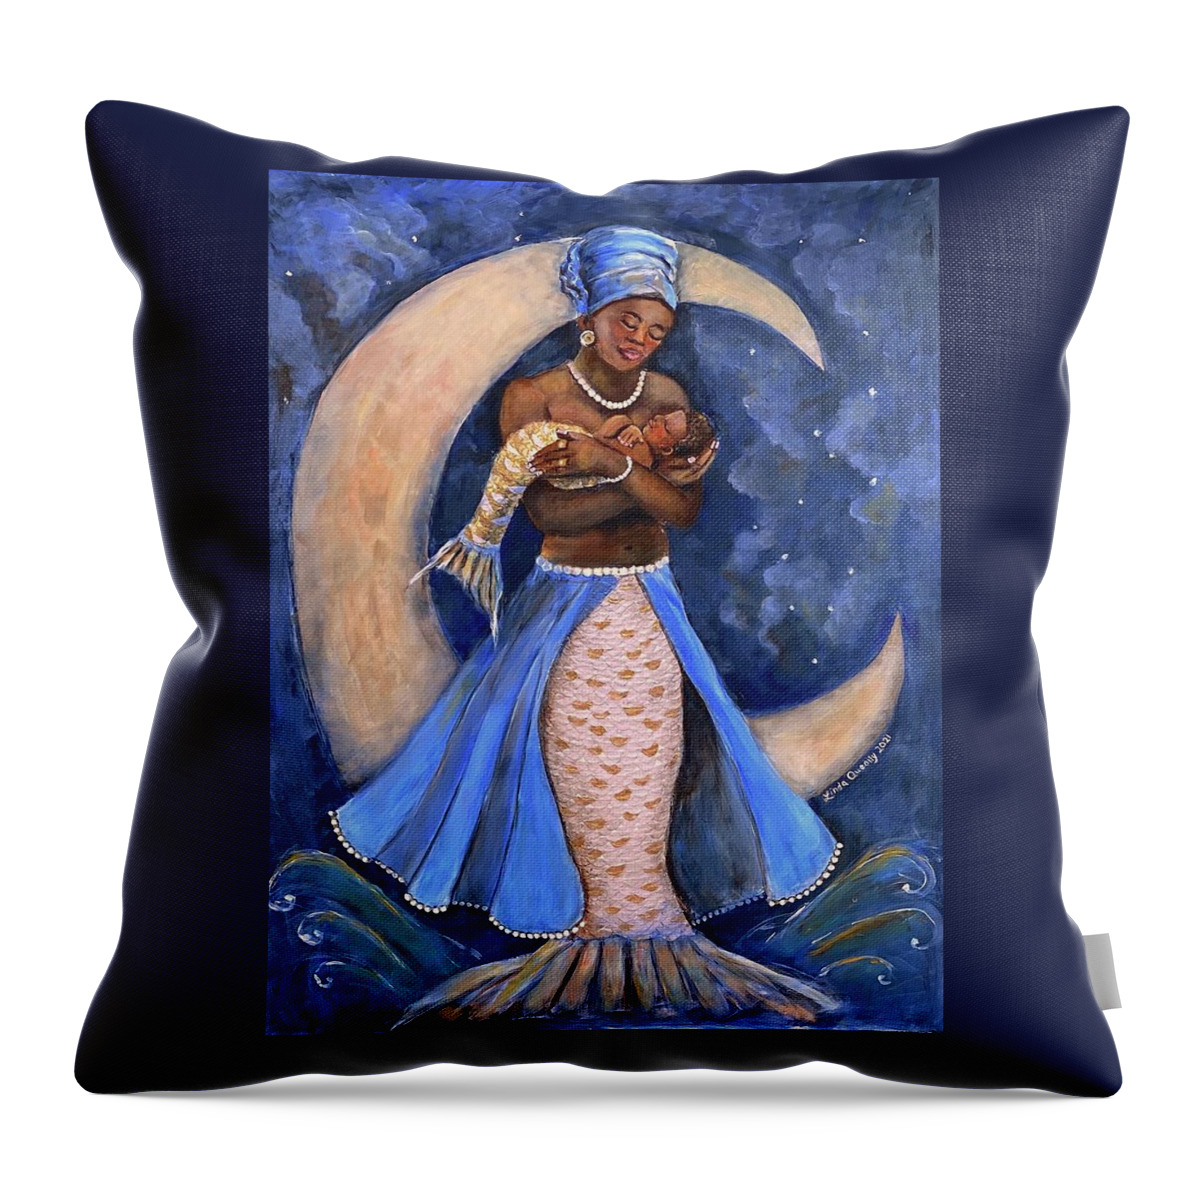 Yemaya Throw Pillow featuring the painting Yemaya by Linda Queally by Linda Queally